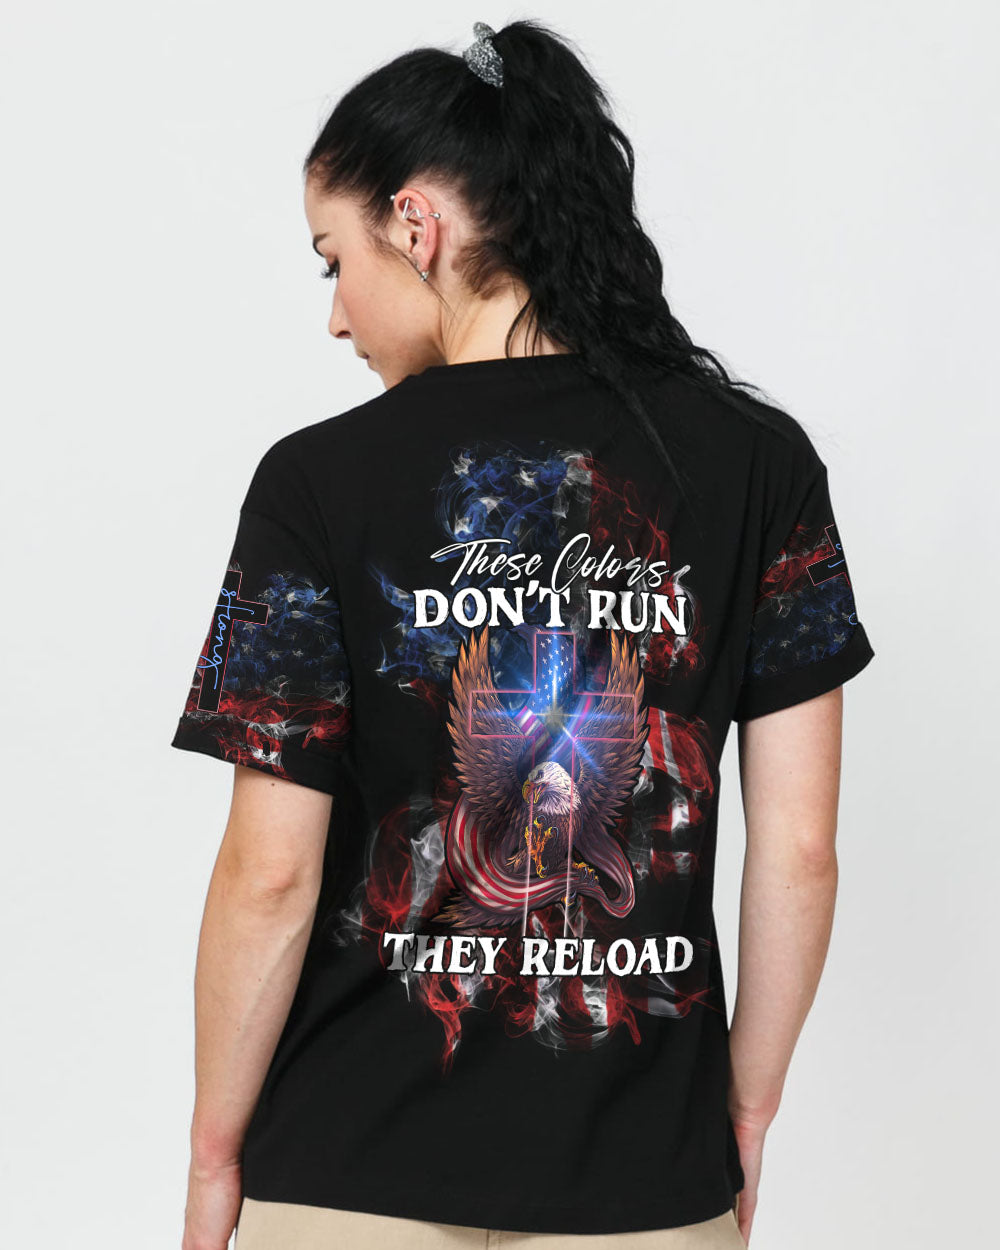 These Colors Don't Run They Reload Eagle Wings Cross Flag Women's Christian Tshirt